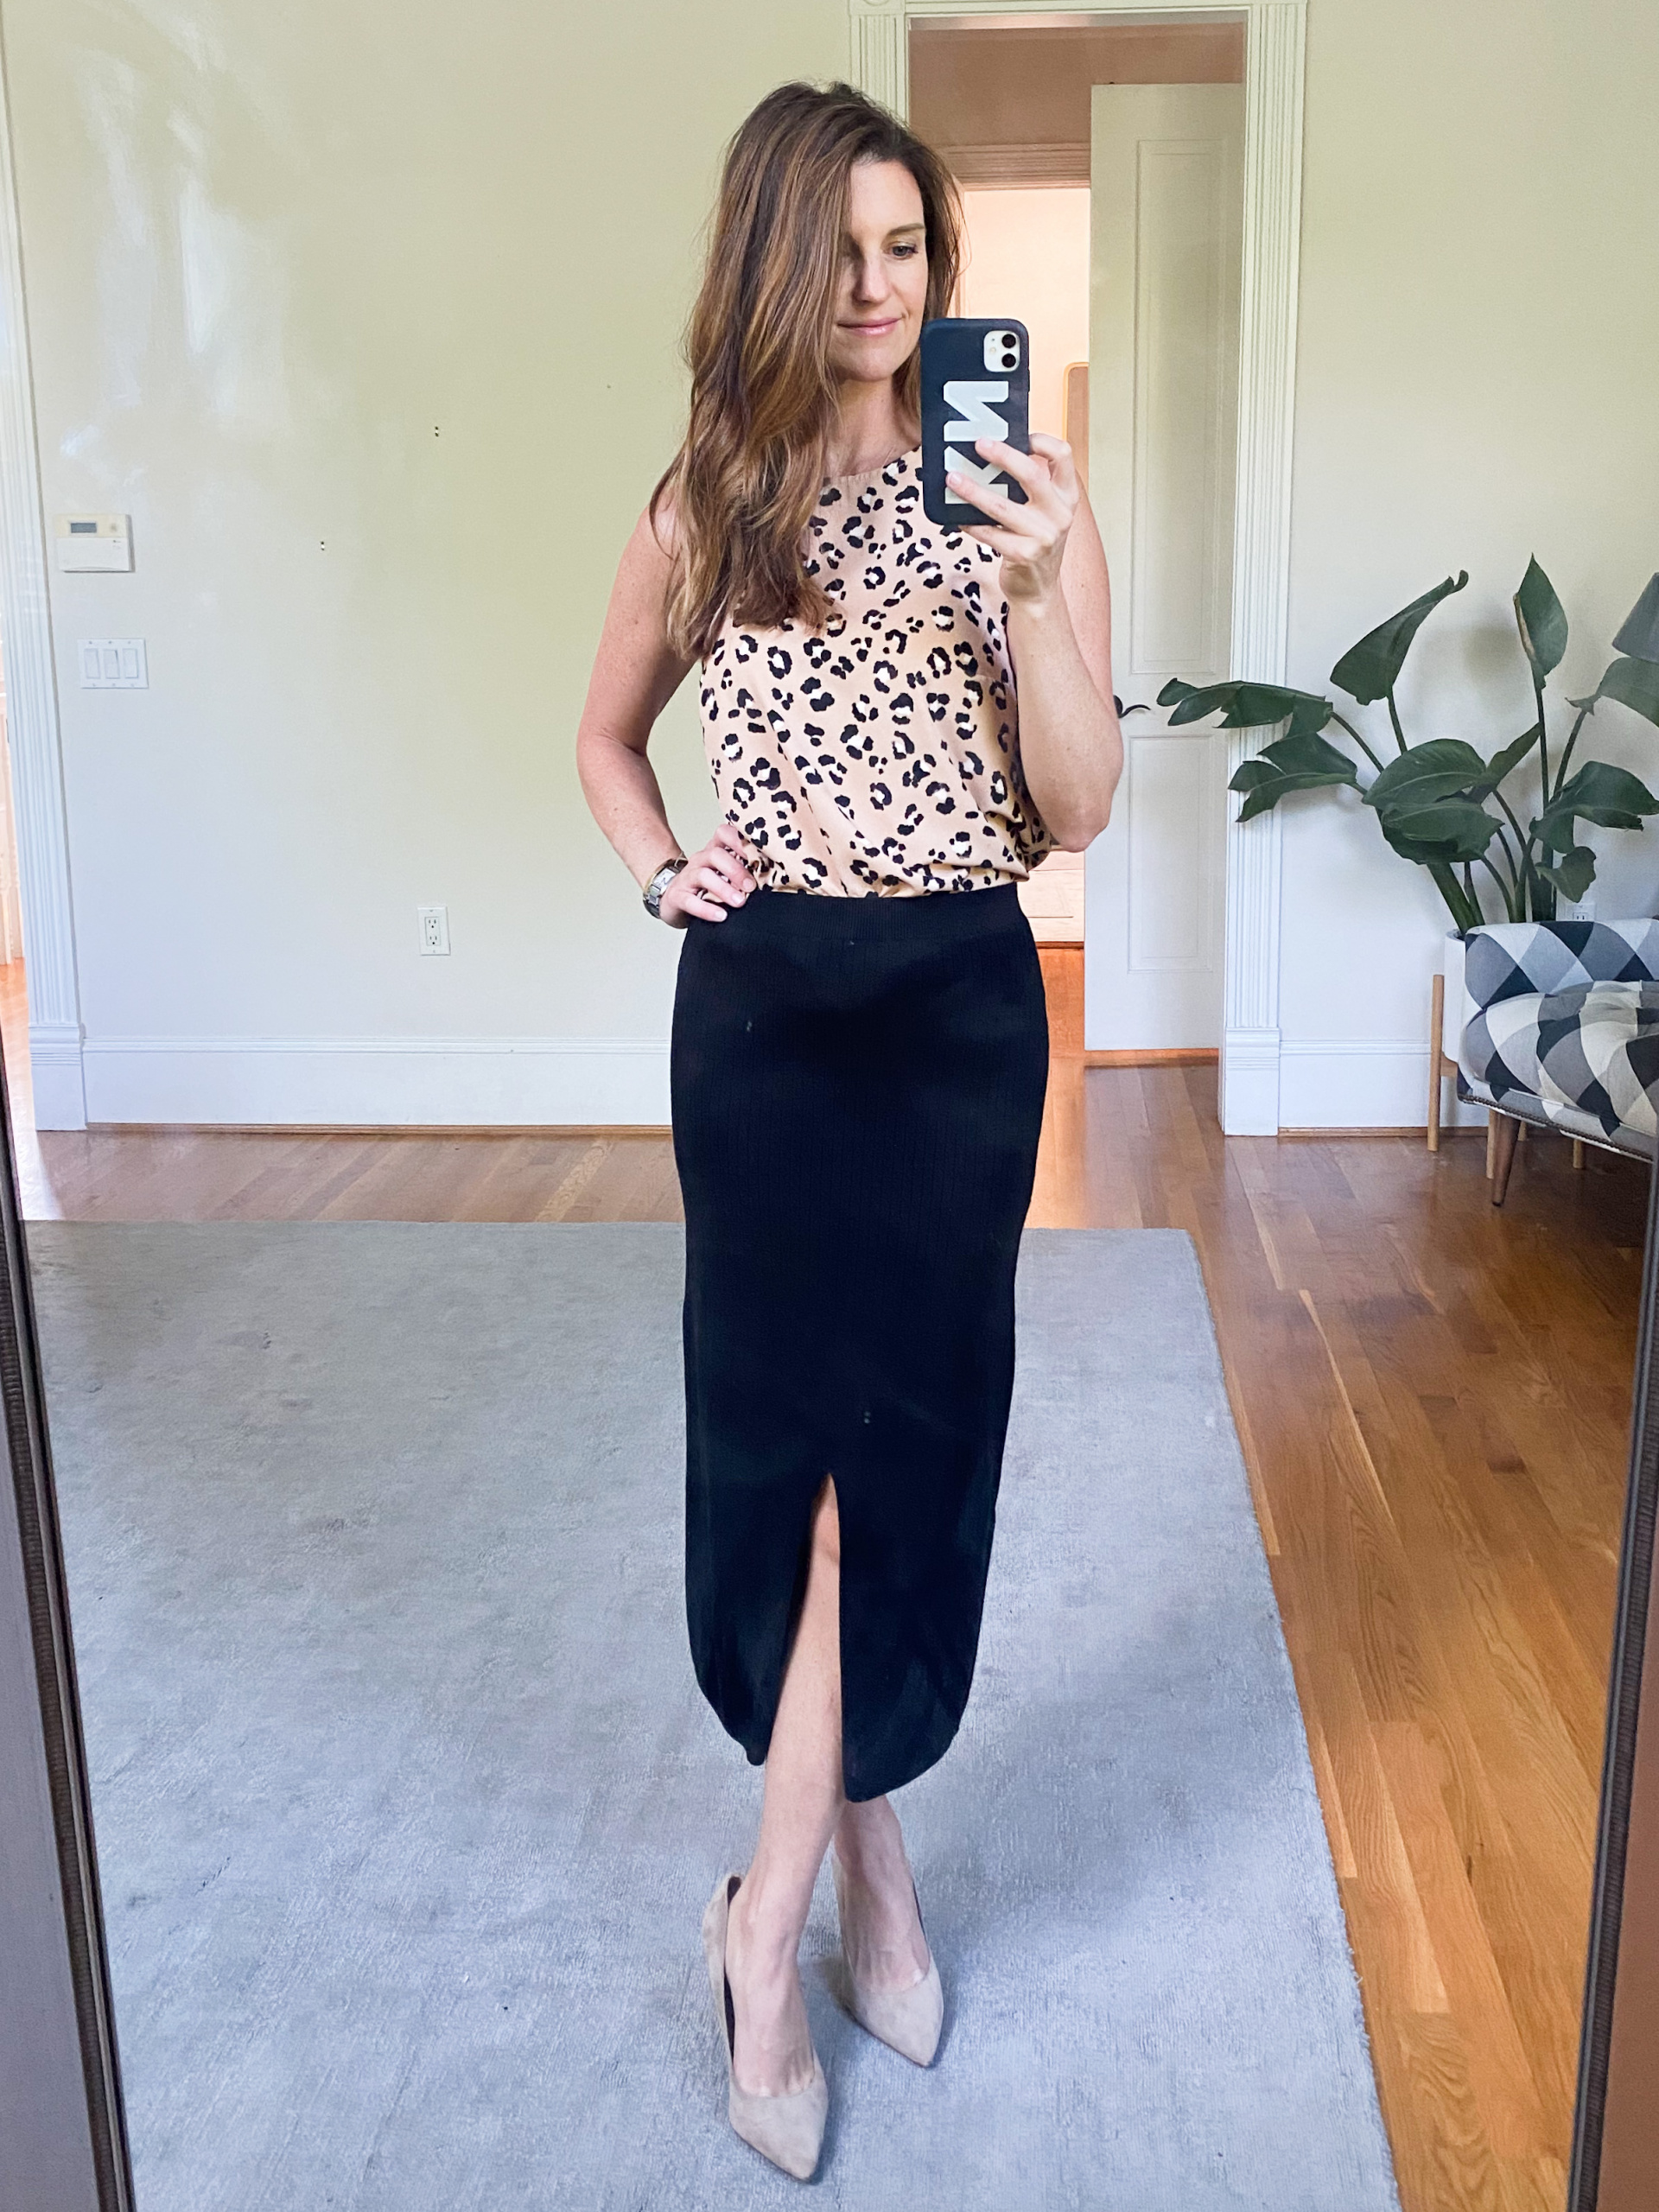 Knit midi skirt and leopard top - transition outfit to fall, over thirty outfit ideas, finding beauty mom outfits 